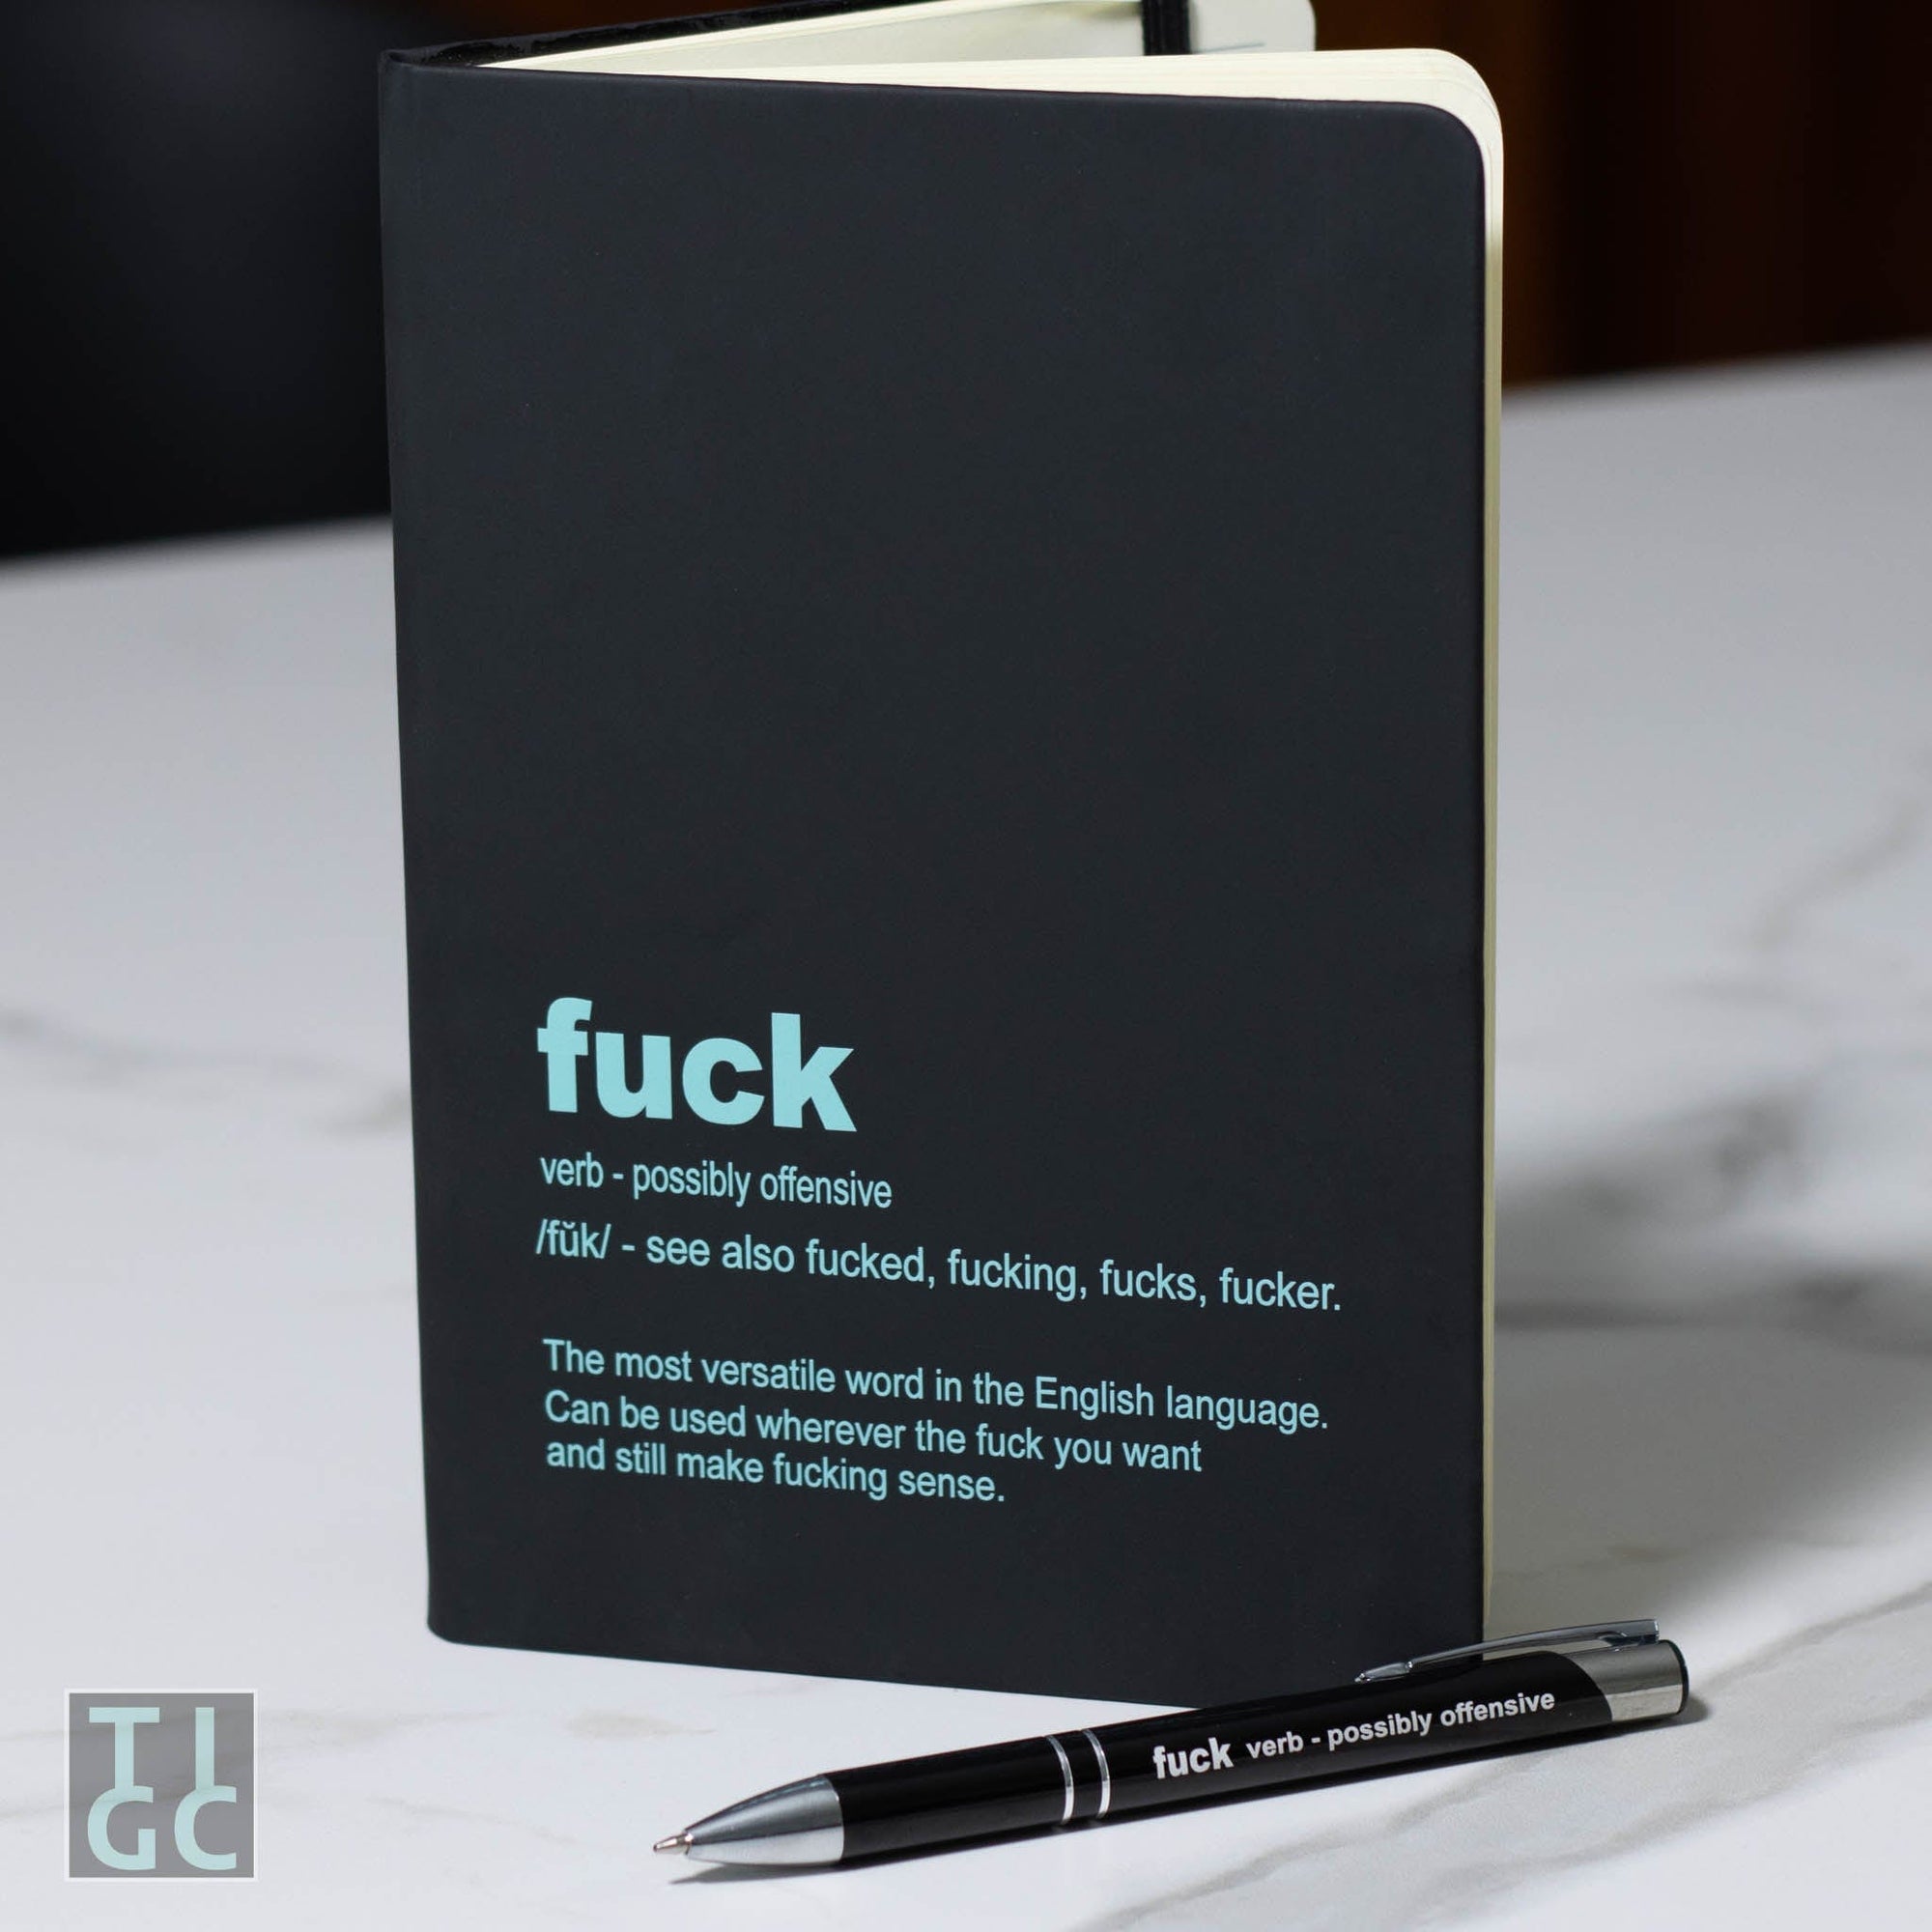 https://cdn.shopify.com/s/files/1/2423/8037/products/tigc-the-inappropriate-gift-co-fuck-definition-notebook-and-pen-combo-30518375120938_2000x.jpg?v=1679472442